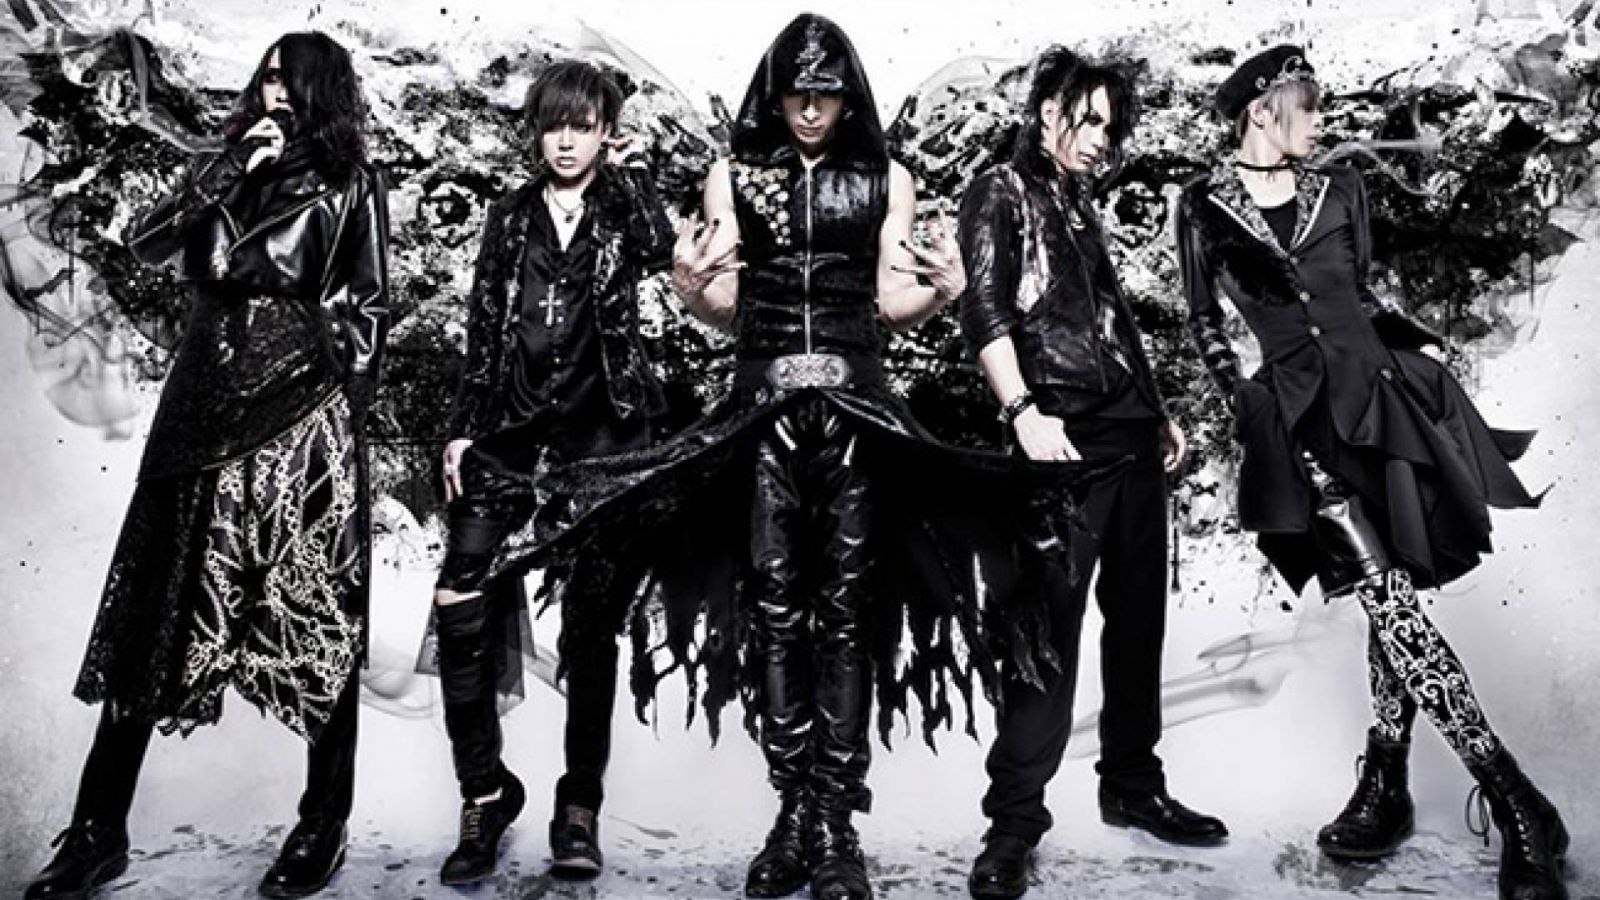 Interview with NOCTURNAL BLOODLUST © NOCTURNAL BLOODLUST